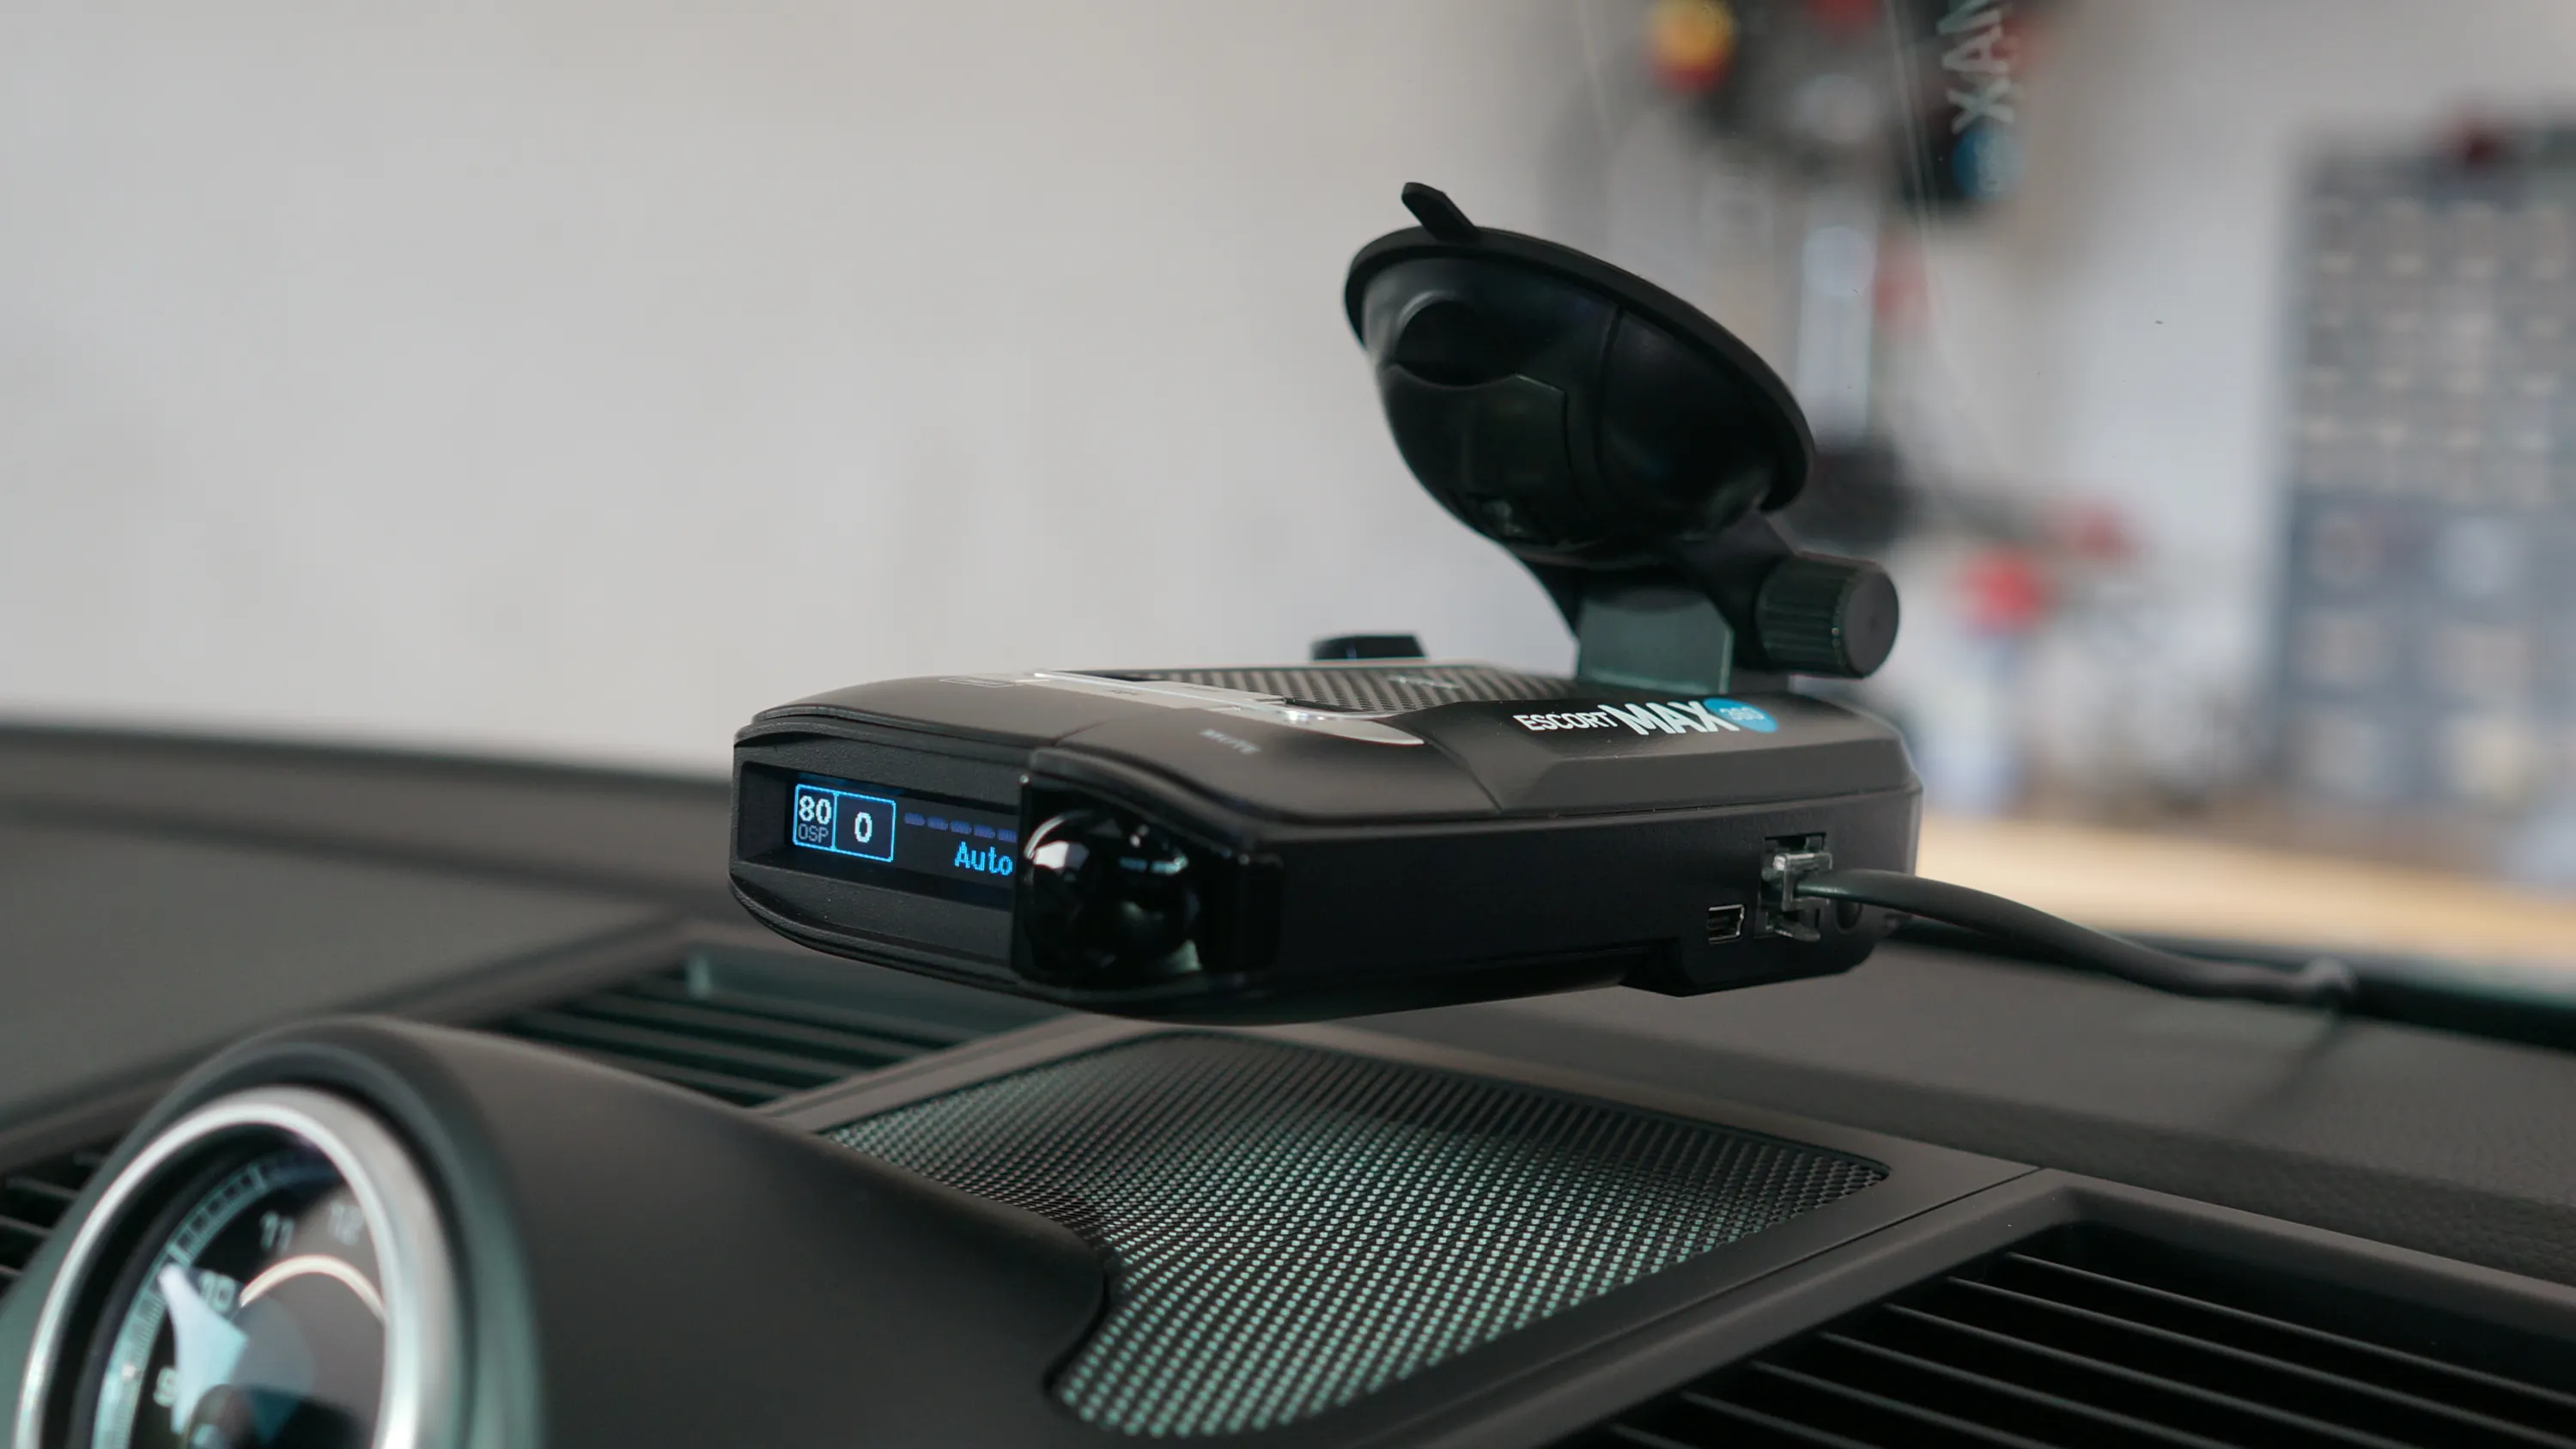 Radar detectors in Germany. Is there a fine for having them?